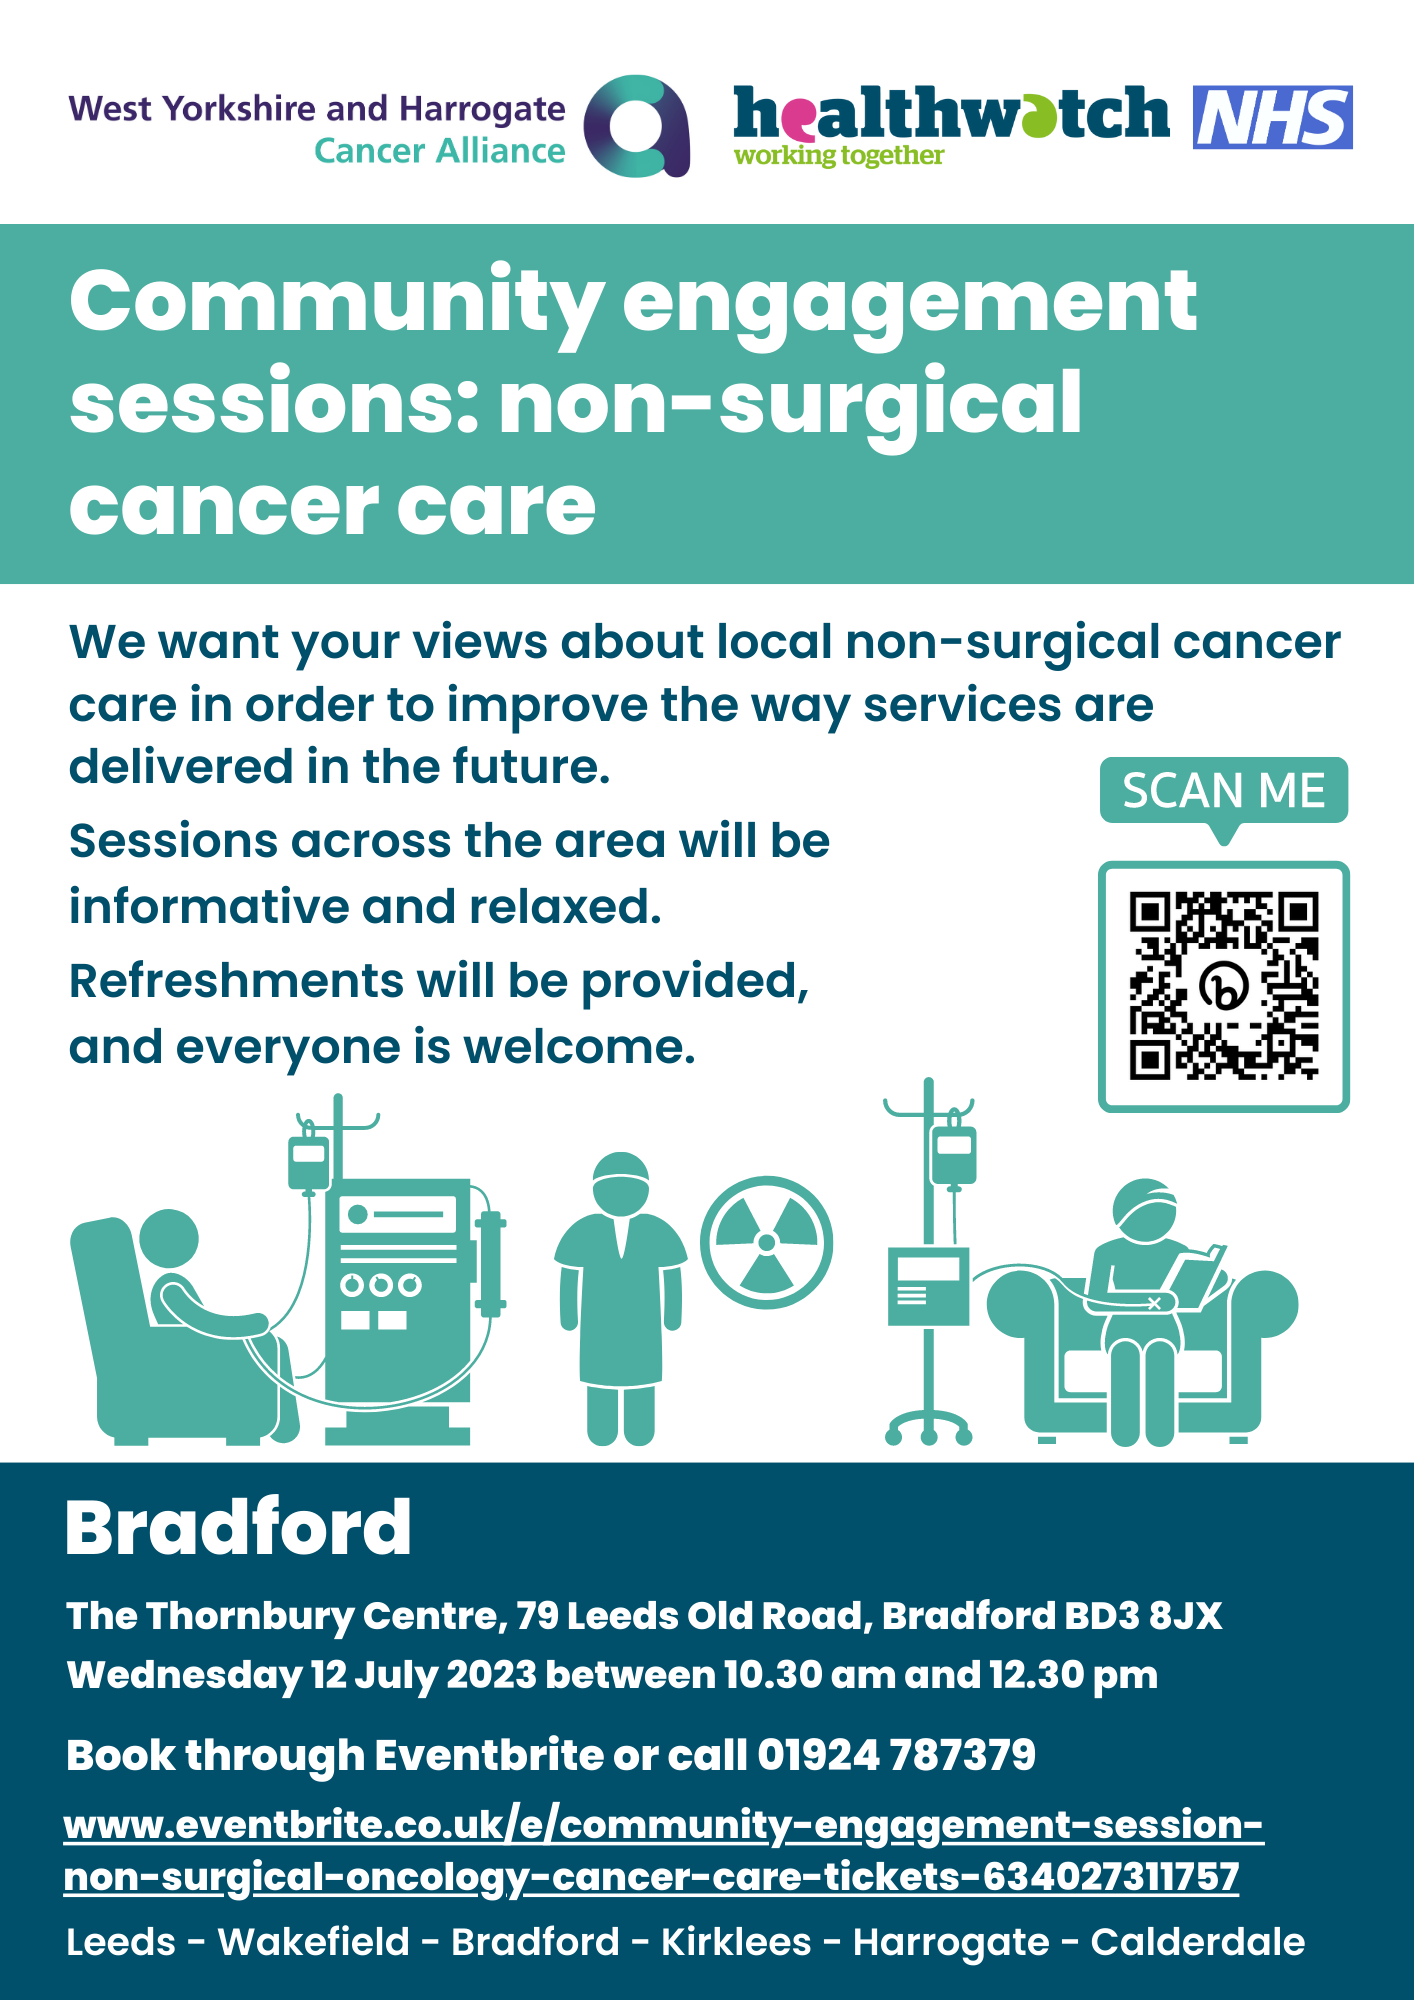 Poster for community engagement session on non-surgical cancer care in Bradford